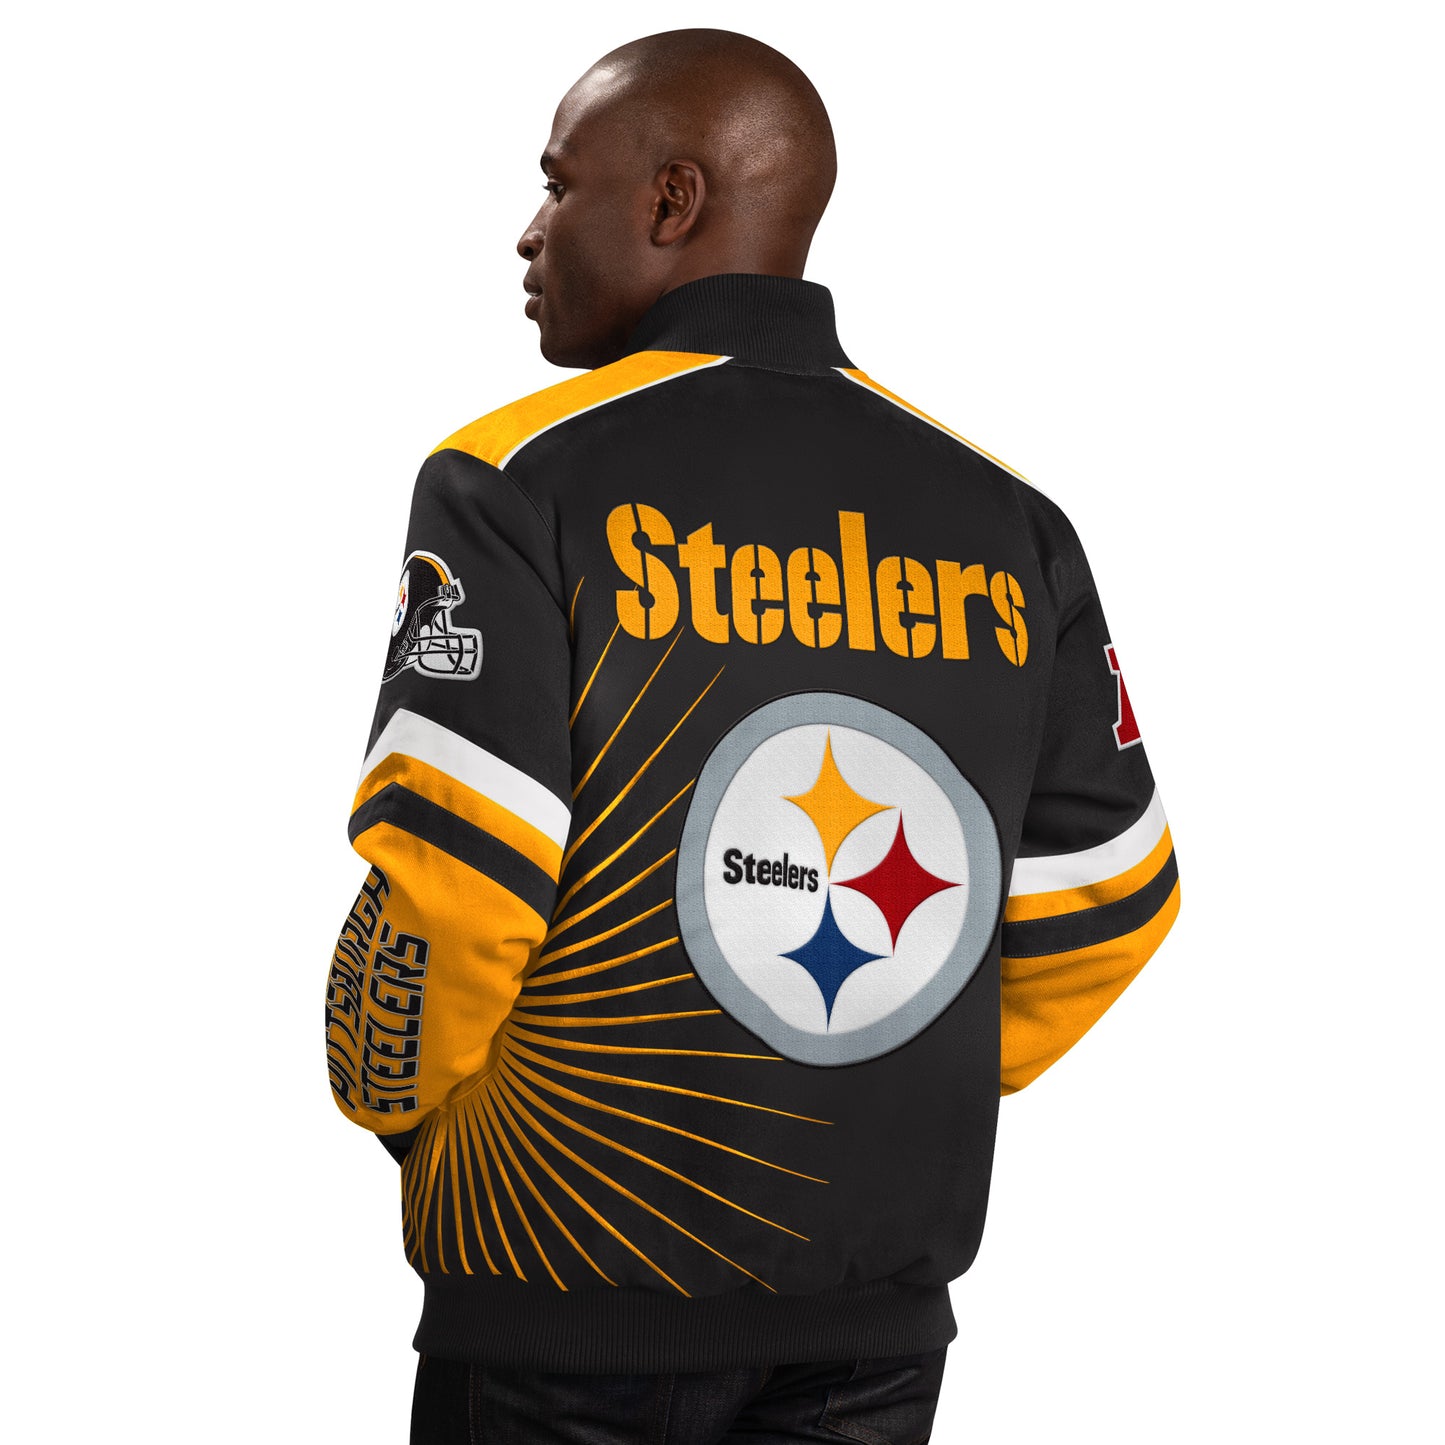 Pittsburgh Steelers Extreme Redzone Twill Men's Jacket By G-III - Black